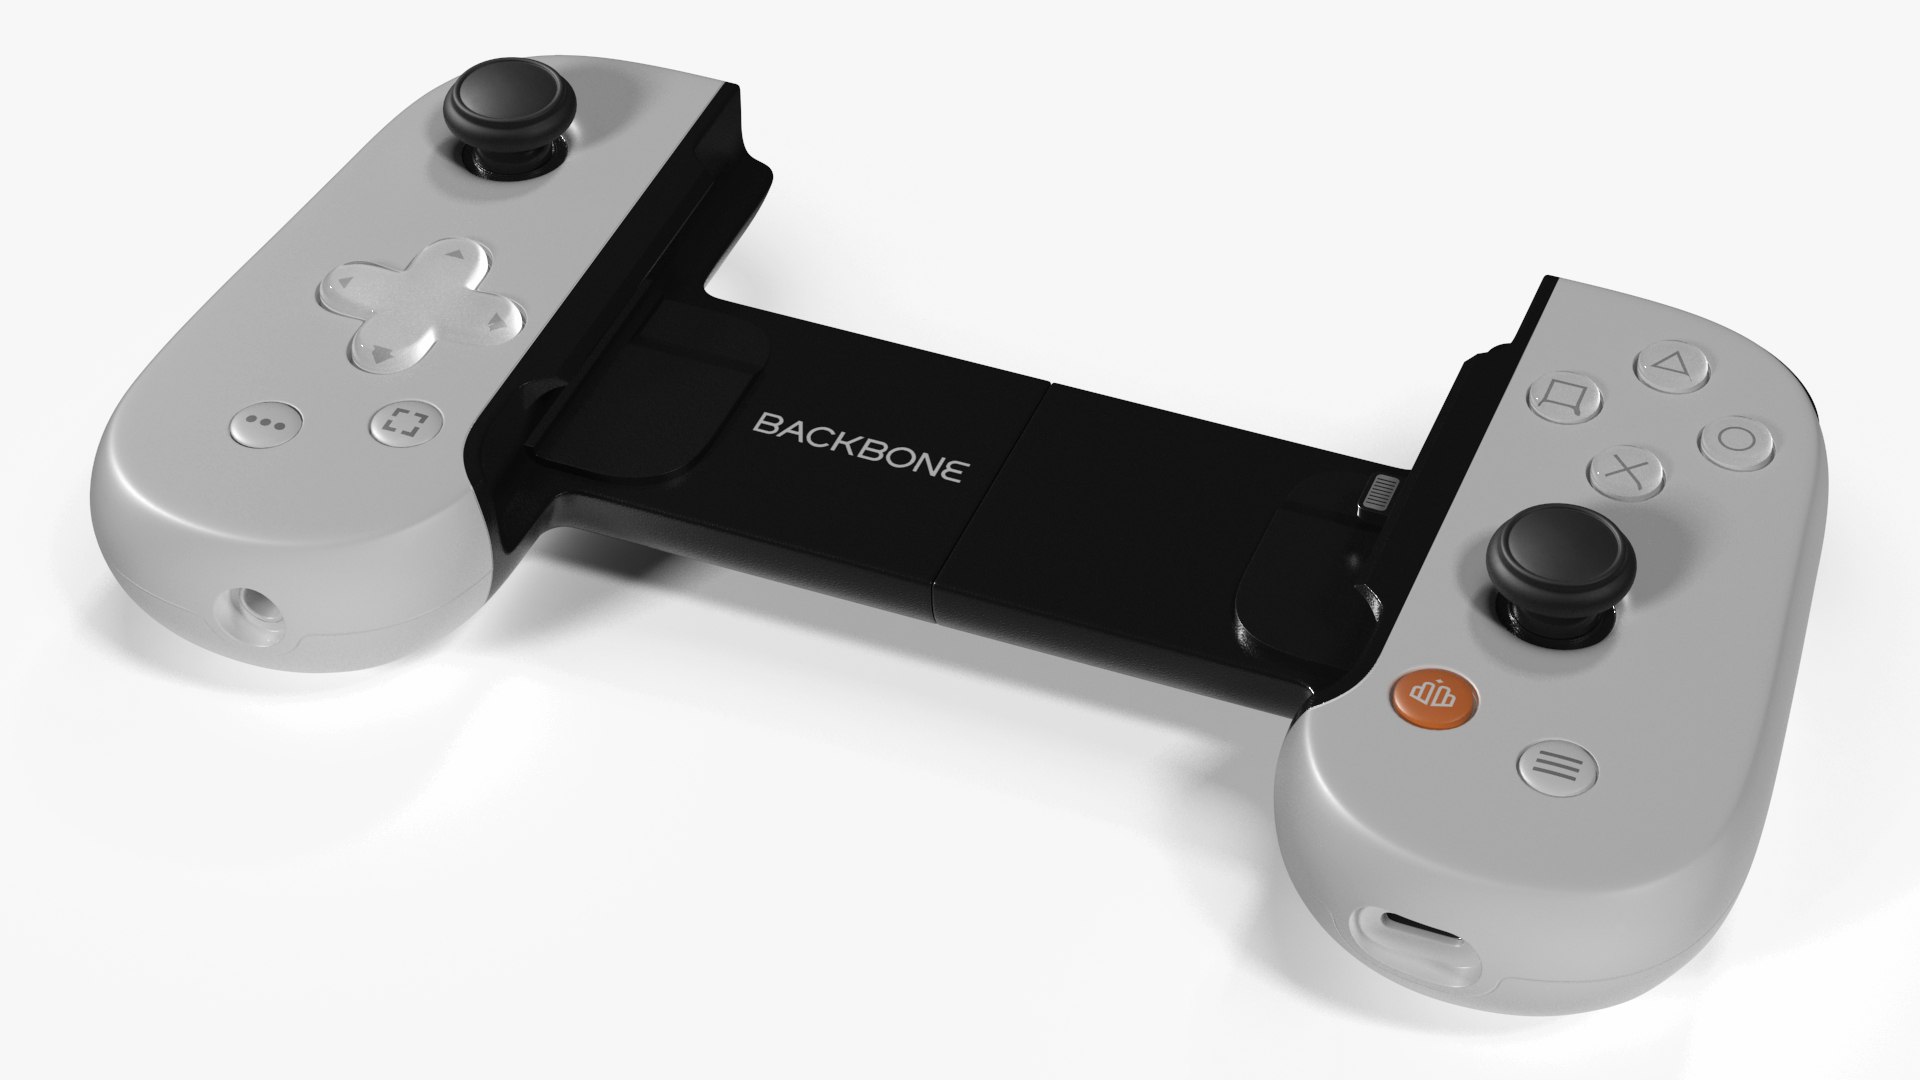 Backbone made a PlayStation version of its excellent iPhone controller